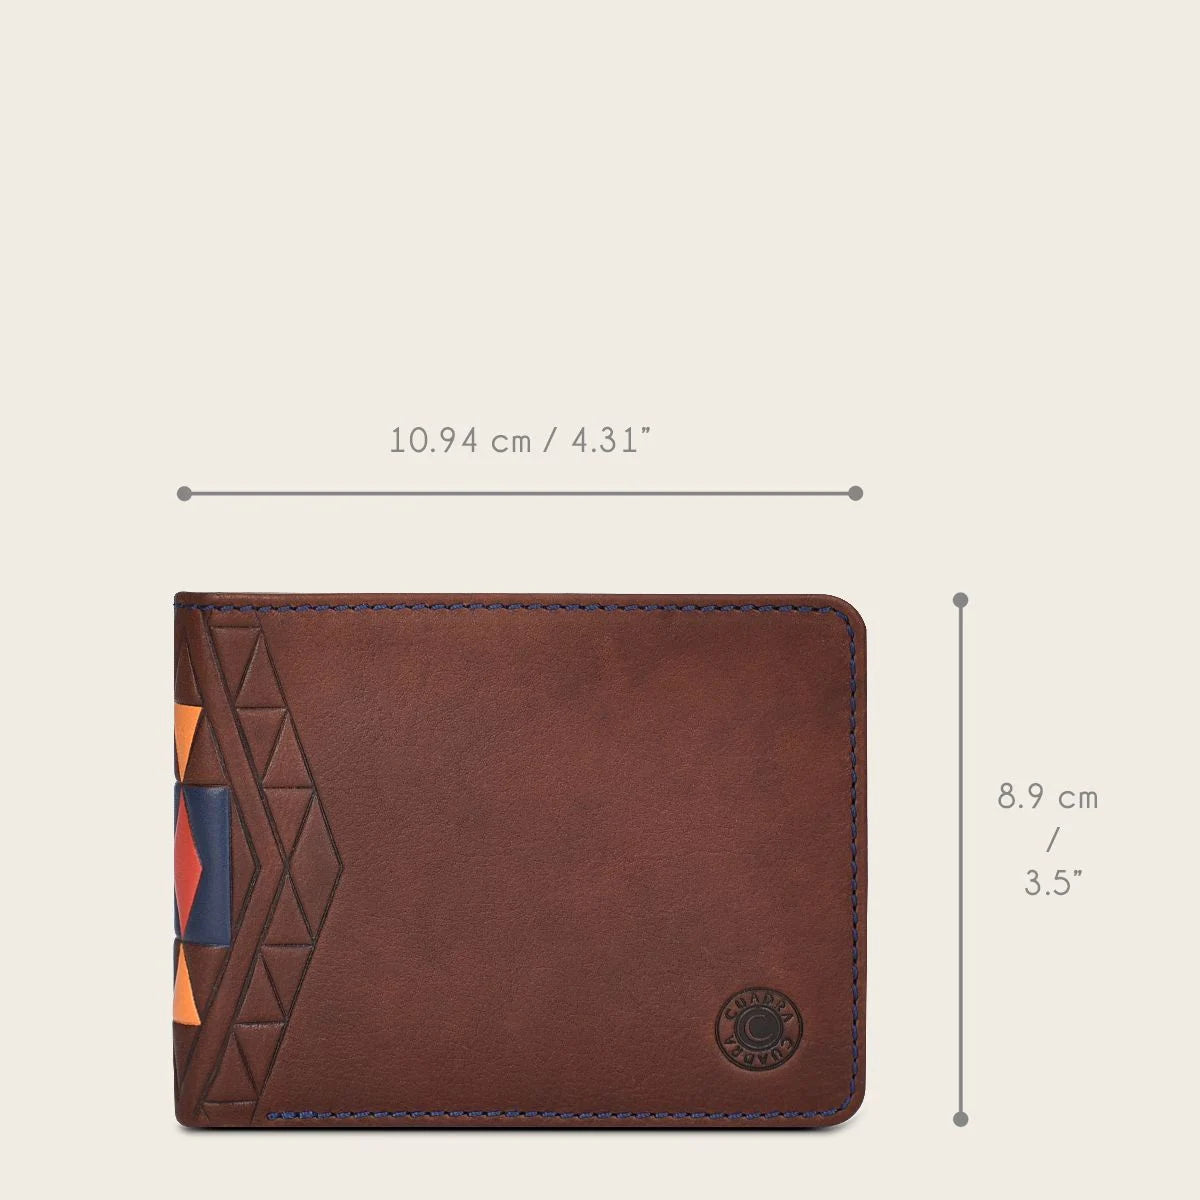 Brown and colored bovine leather wallet 6